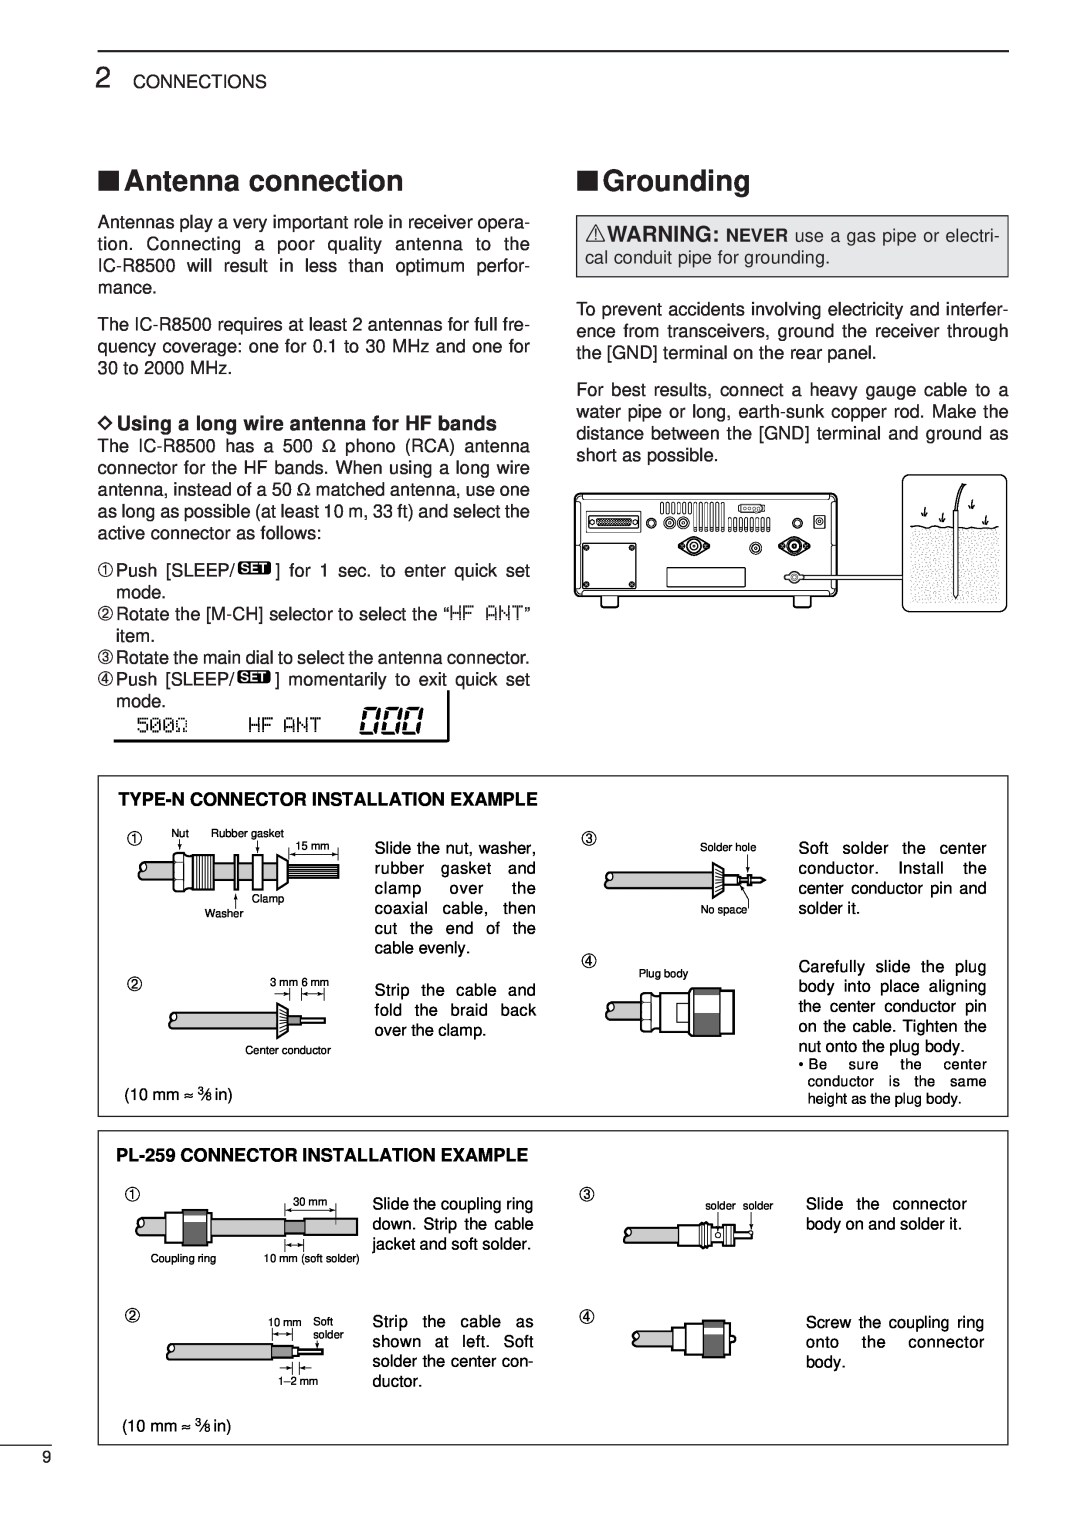 Icom IC-R8500 instruction manual Antenna connection, Grounding, D Using a long wire antenna for HF bands 